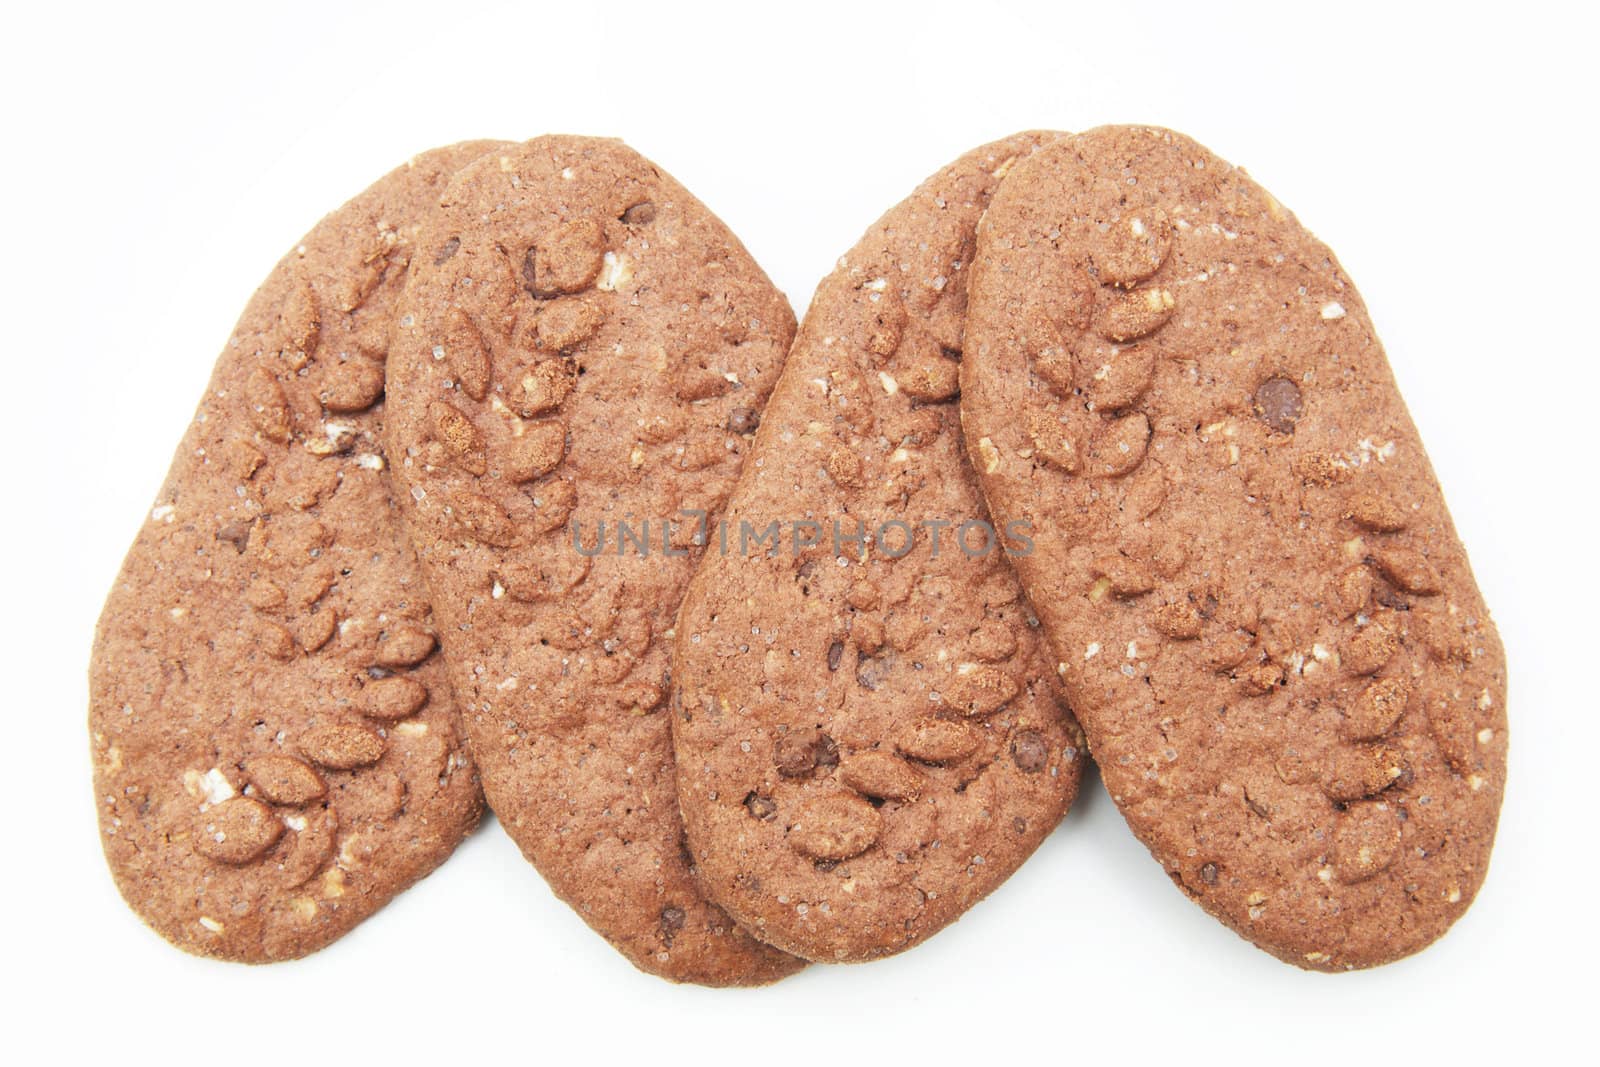  	Cookies on the white background